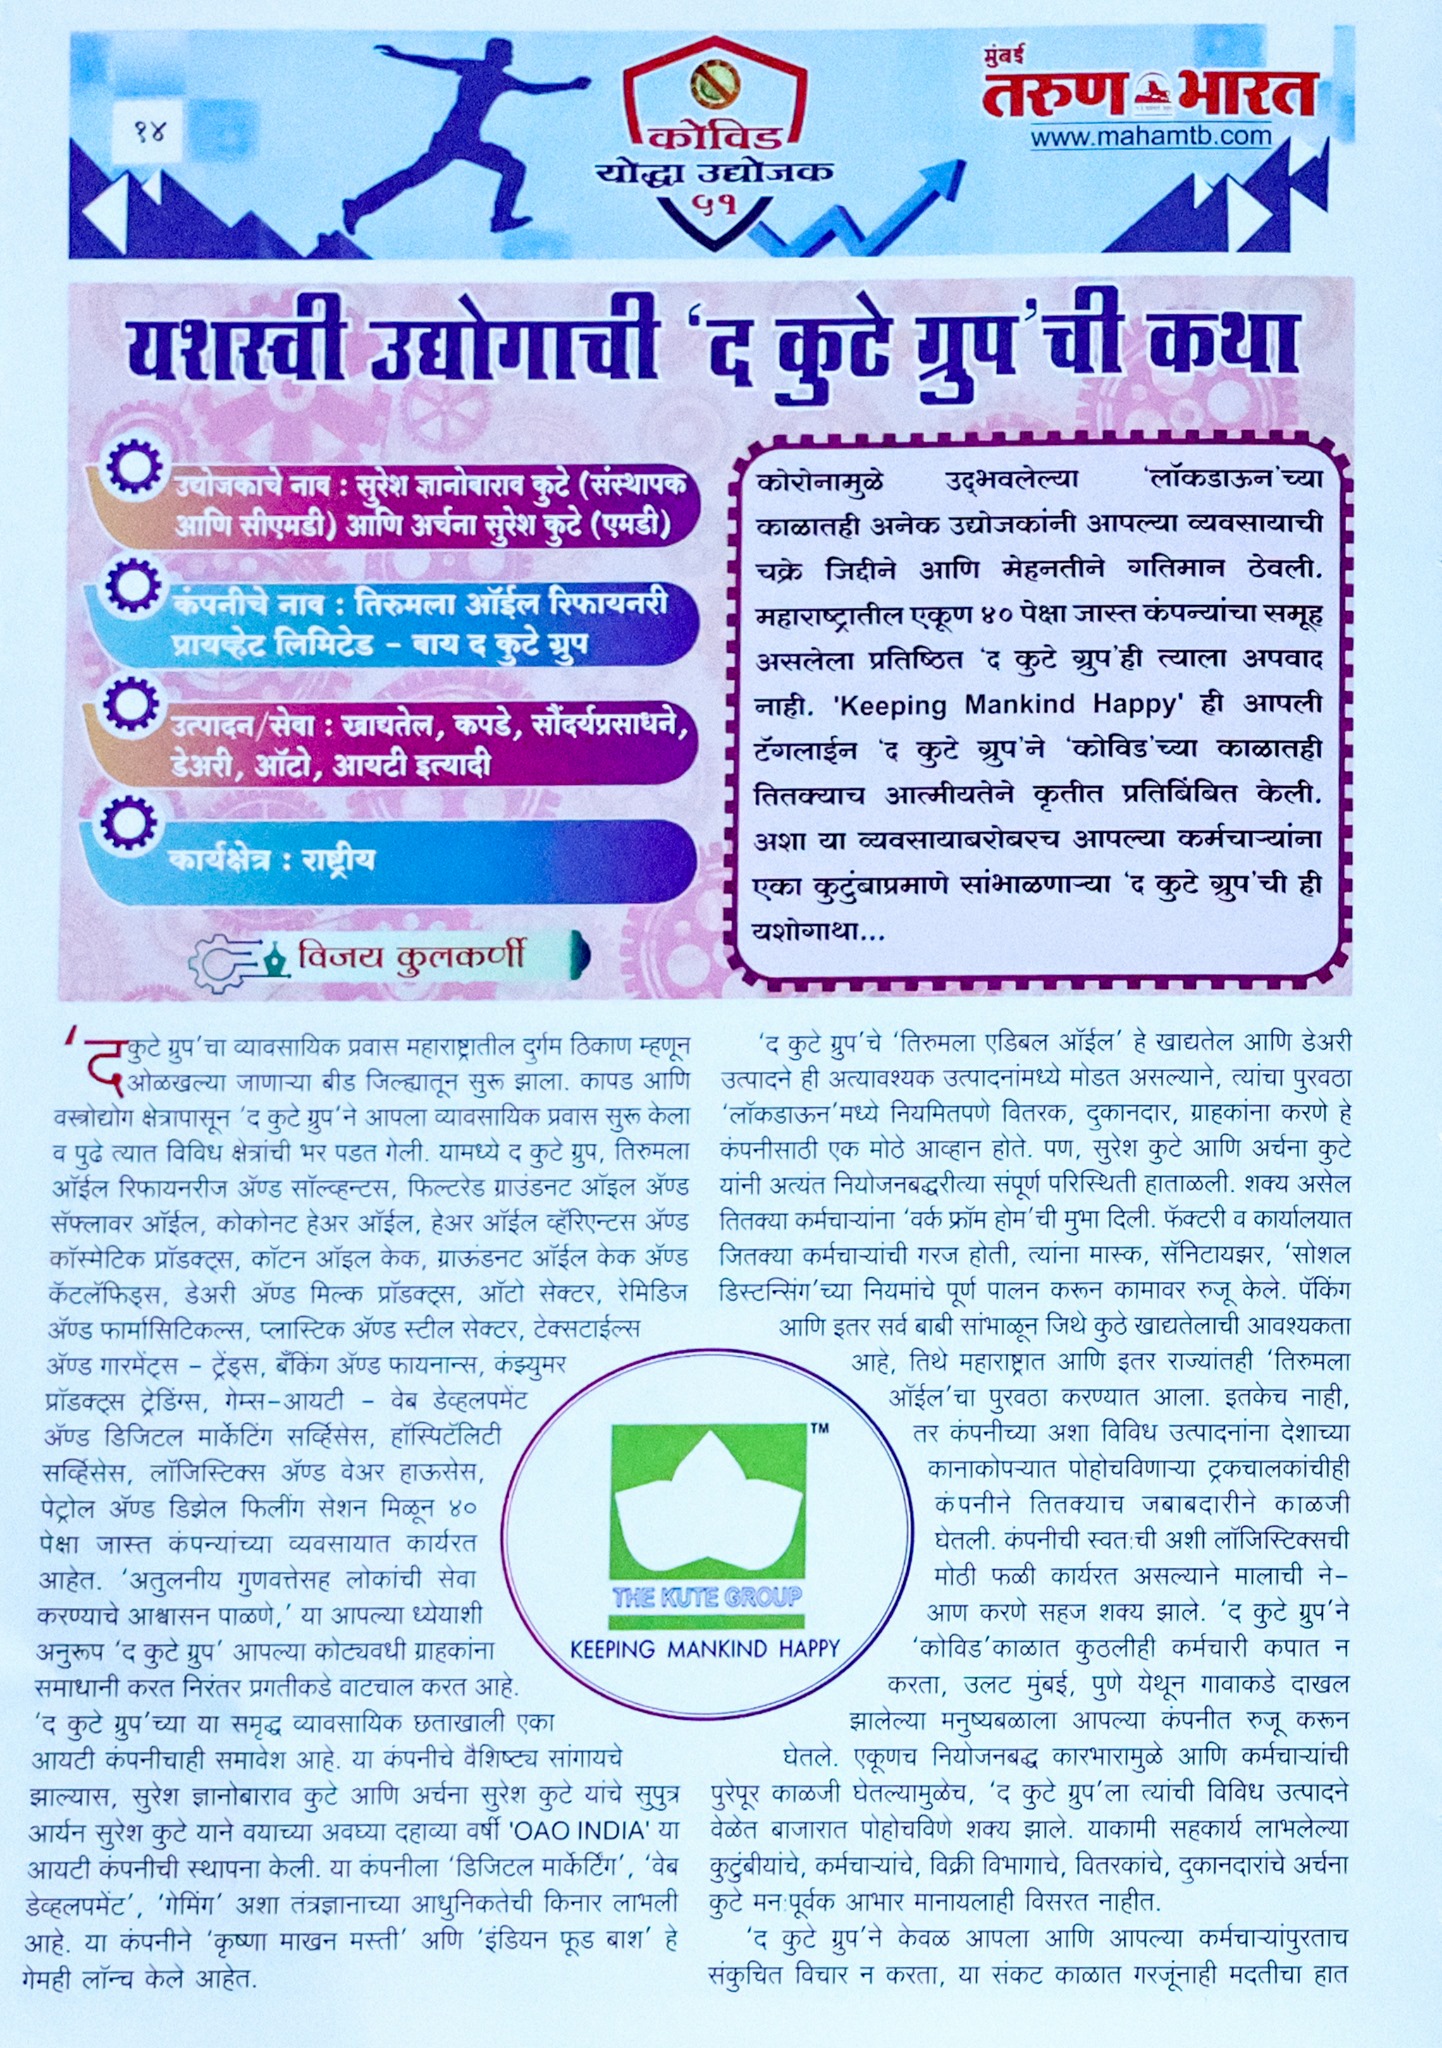 Leading Magazine acknowledged relief activities done by The Kute Group during Covid-19 pandemic